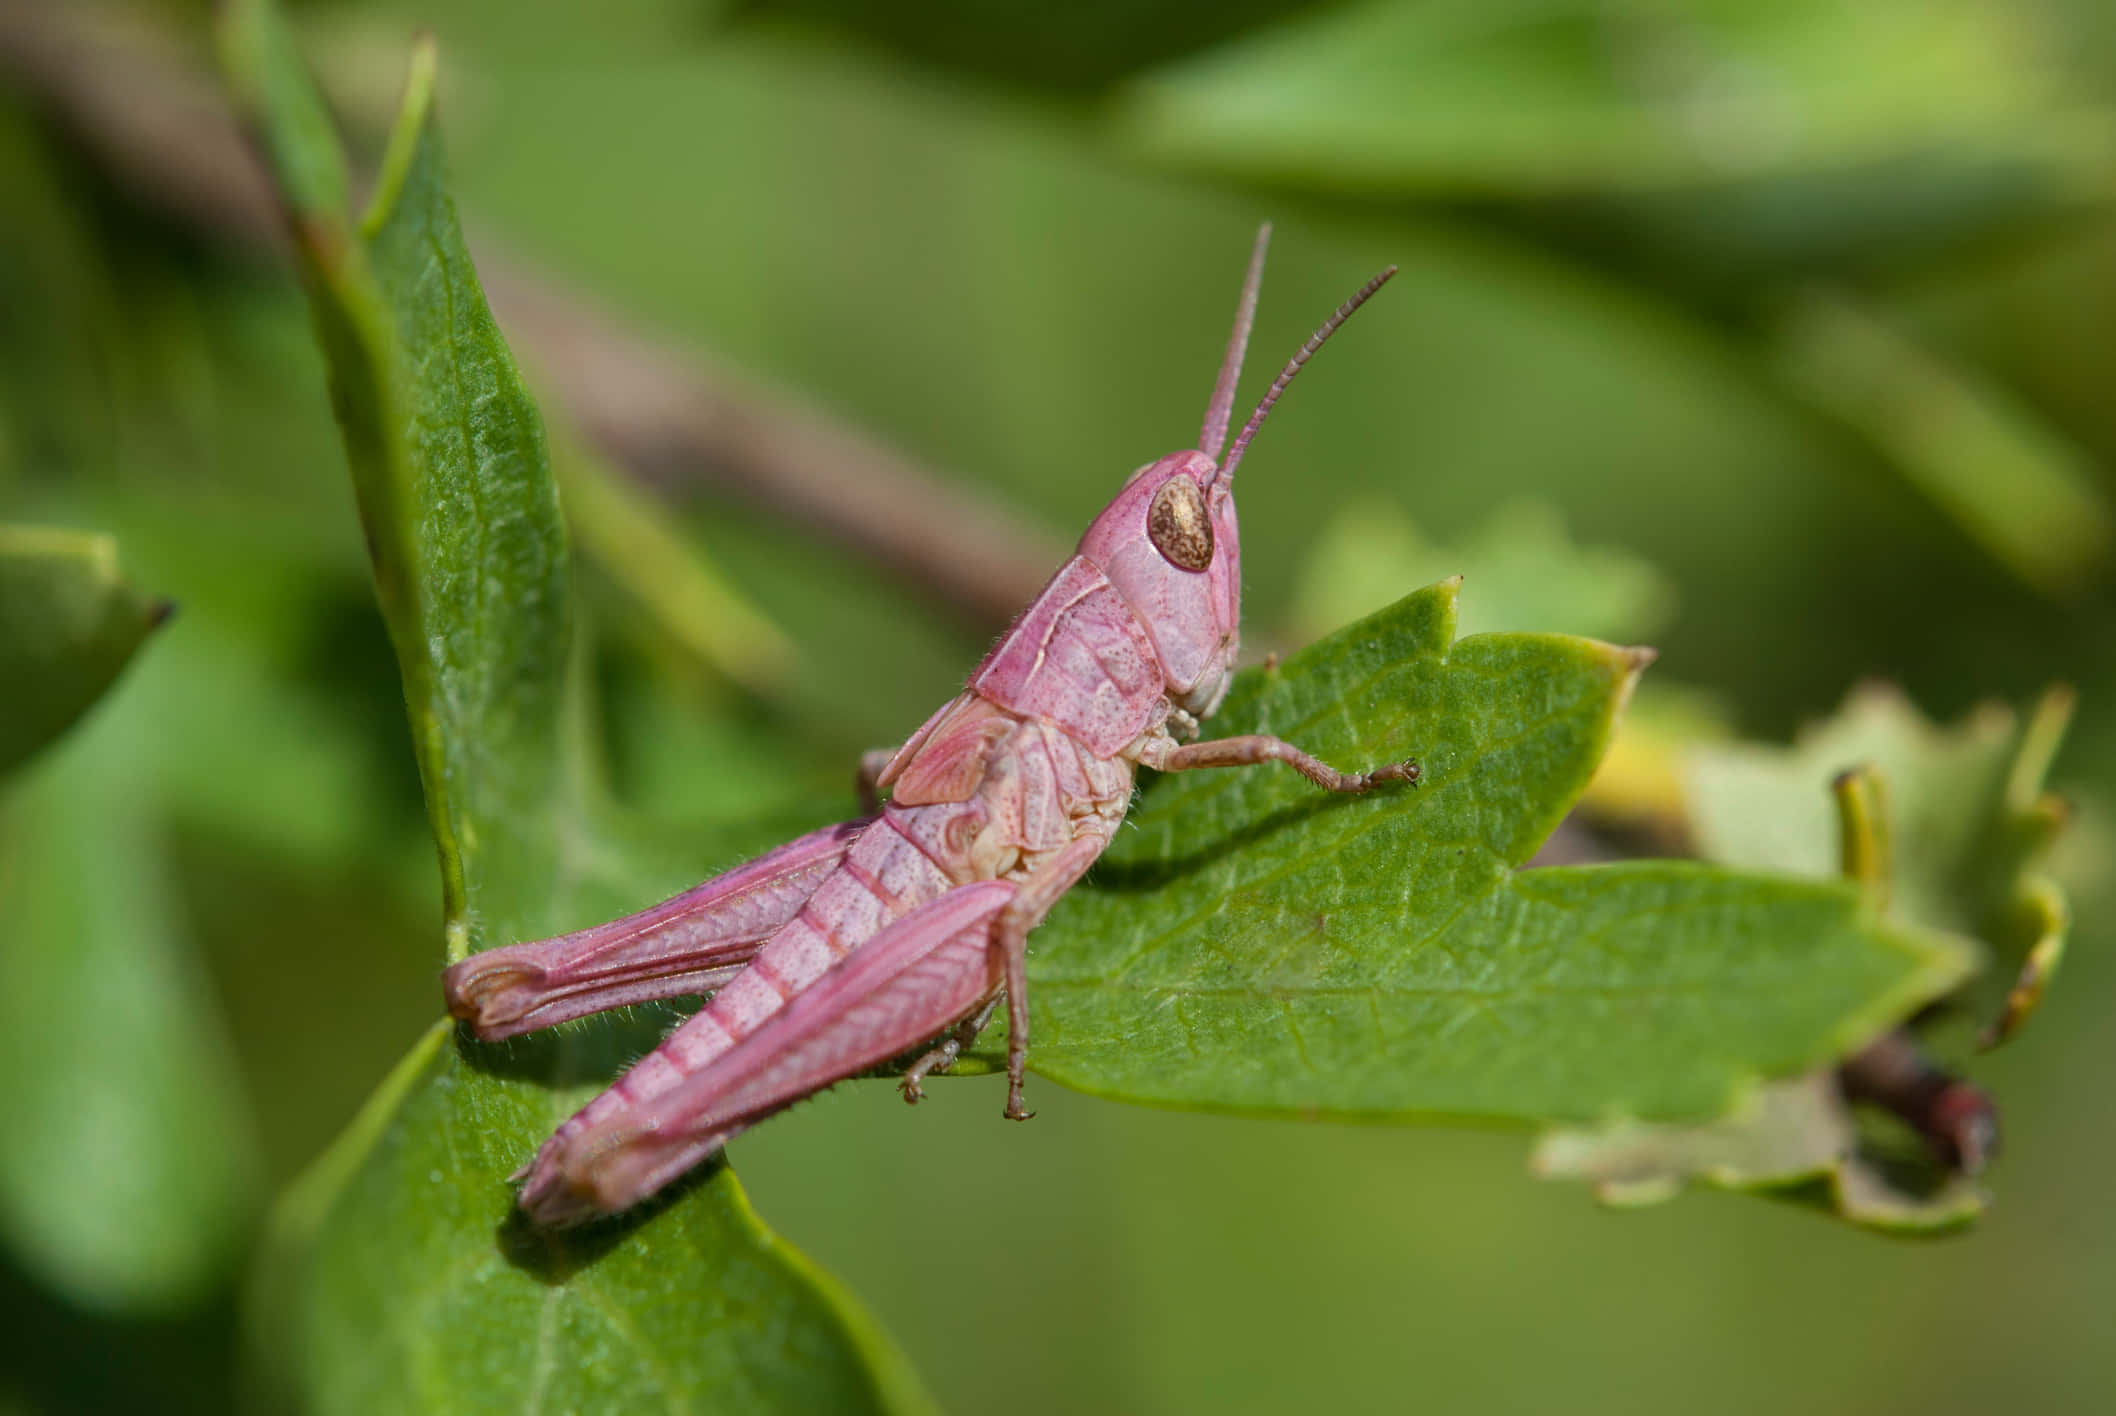 Vibrant Close-up of a Grasshopper on a Plant